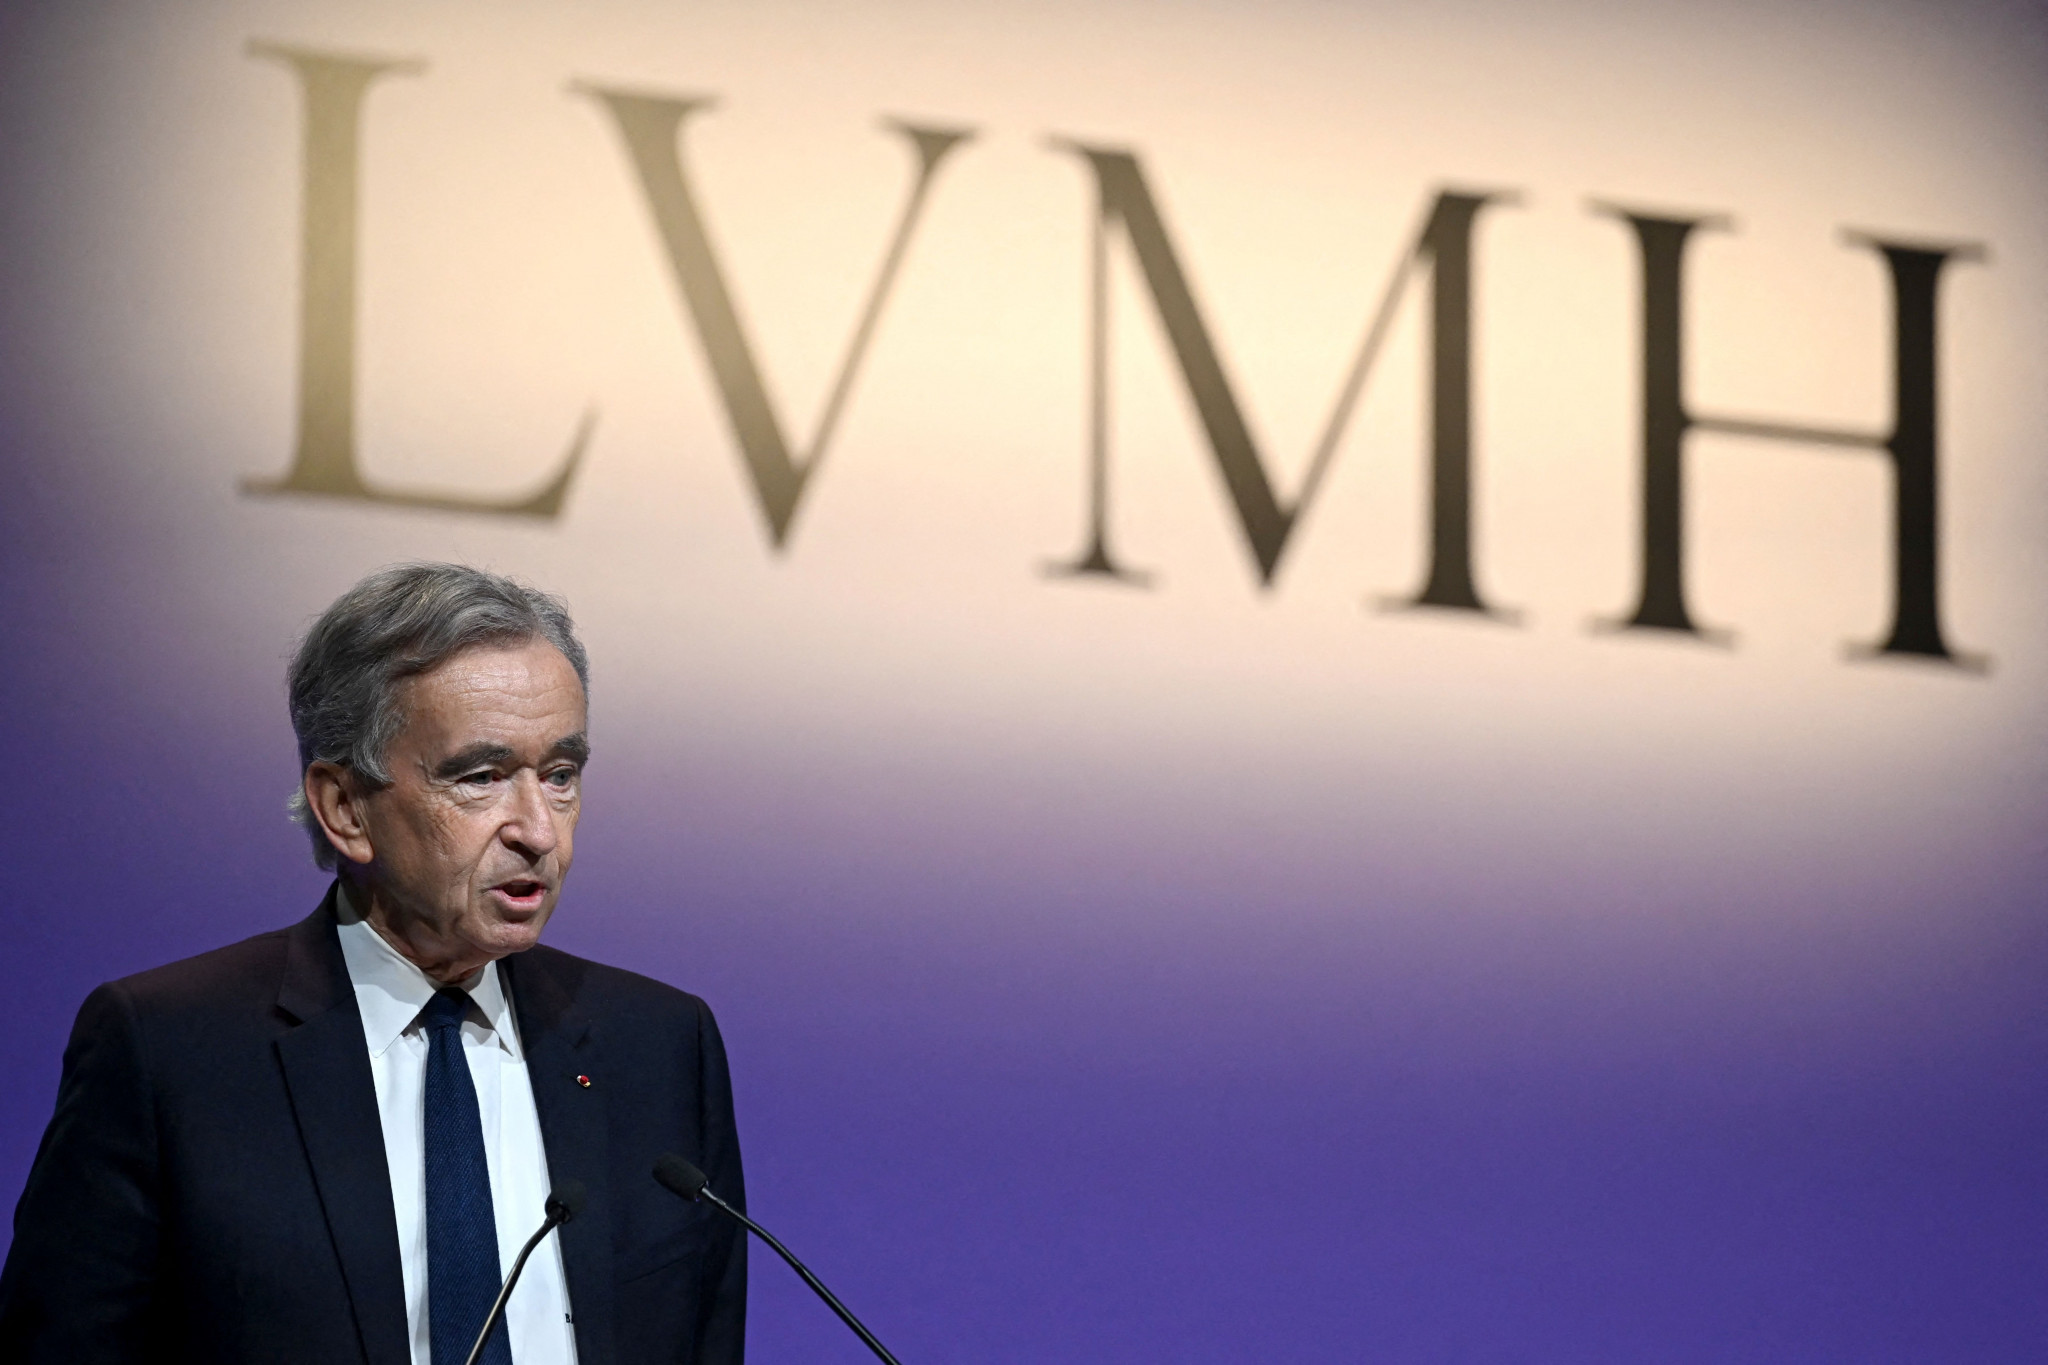 Bernard Arnault, the owner of French luxury goods brand Moët Hennessy Louis Vuitton, has revealed his company are in negotiations with Paris 2024 about becoming a premium sponsor ©Getty Images